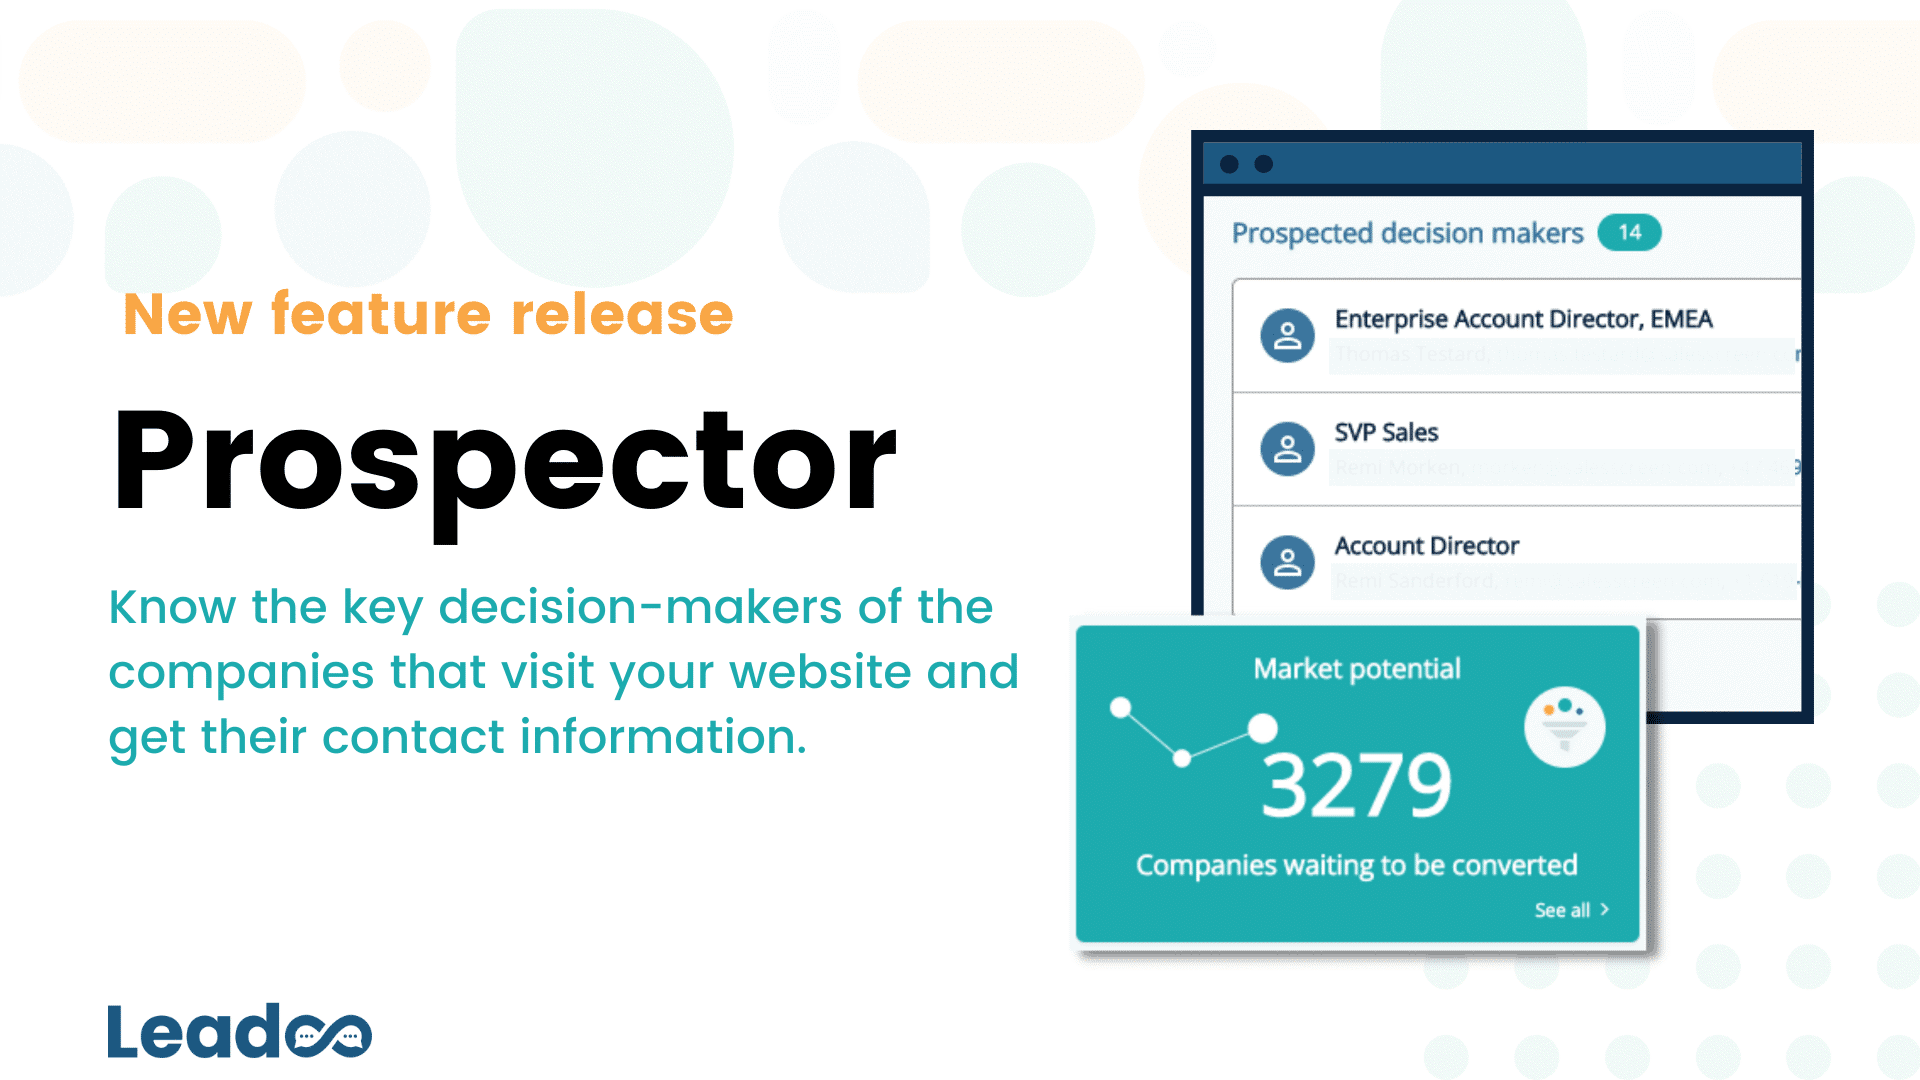 New feature release – Prospector